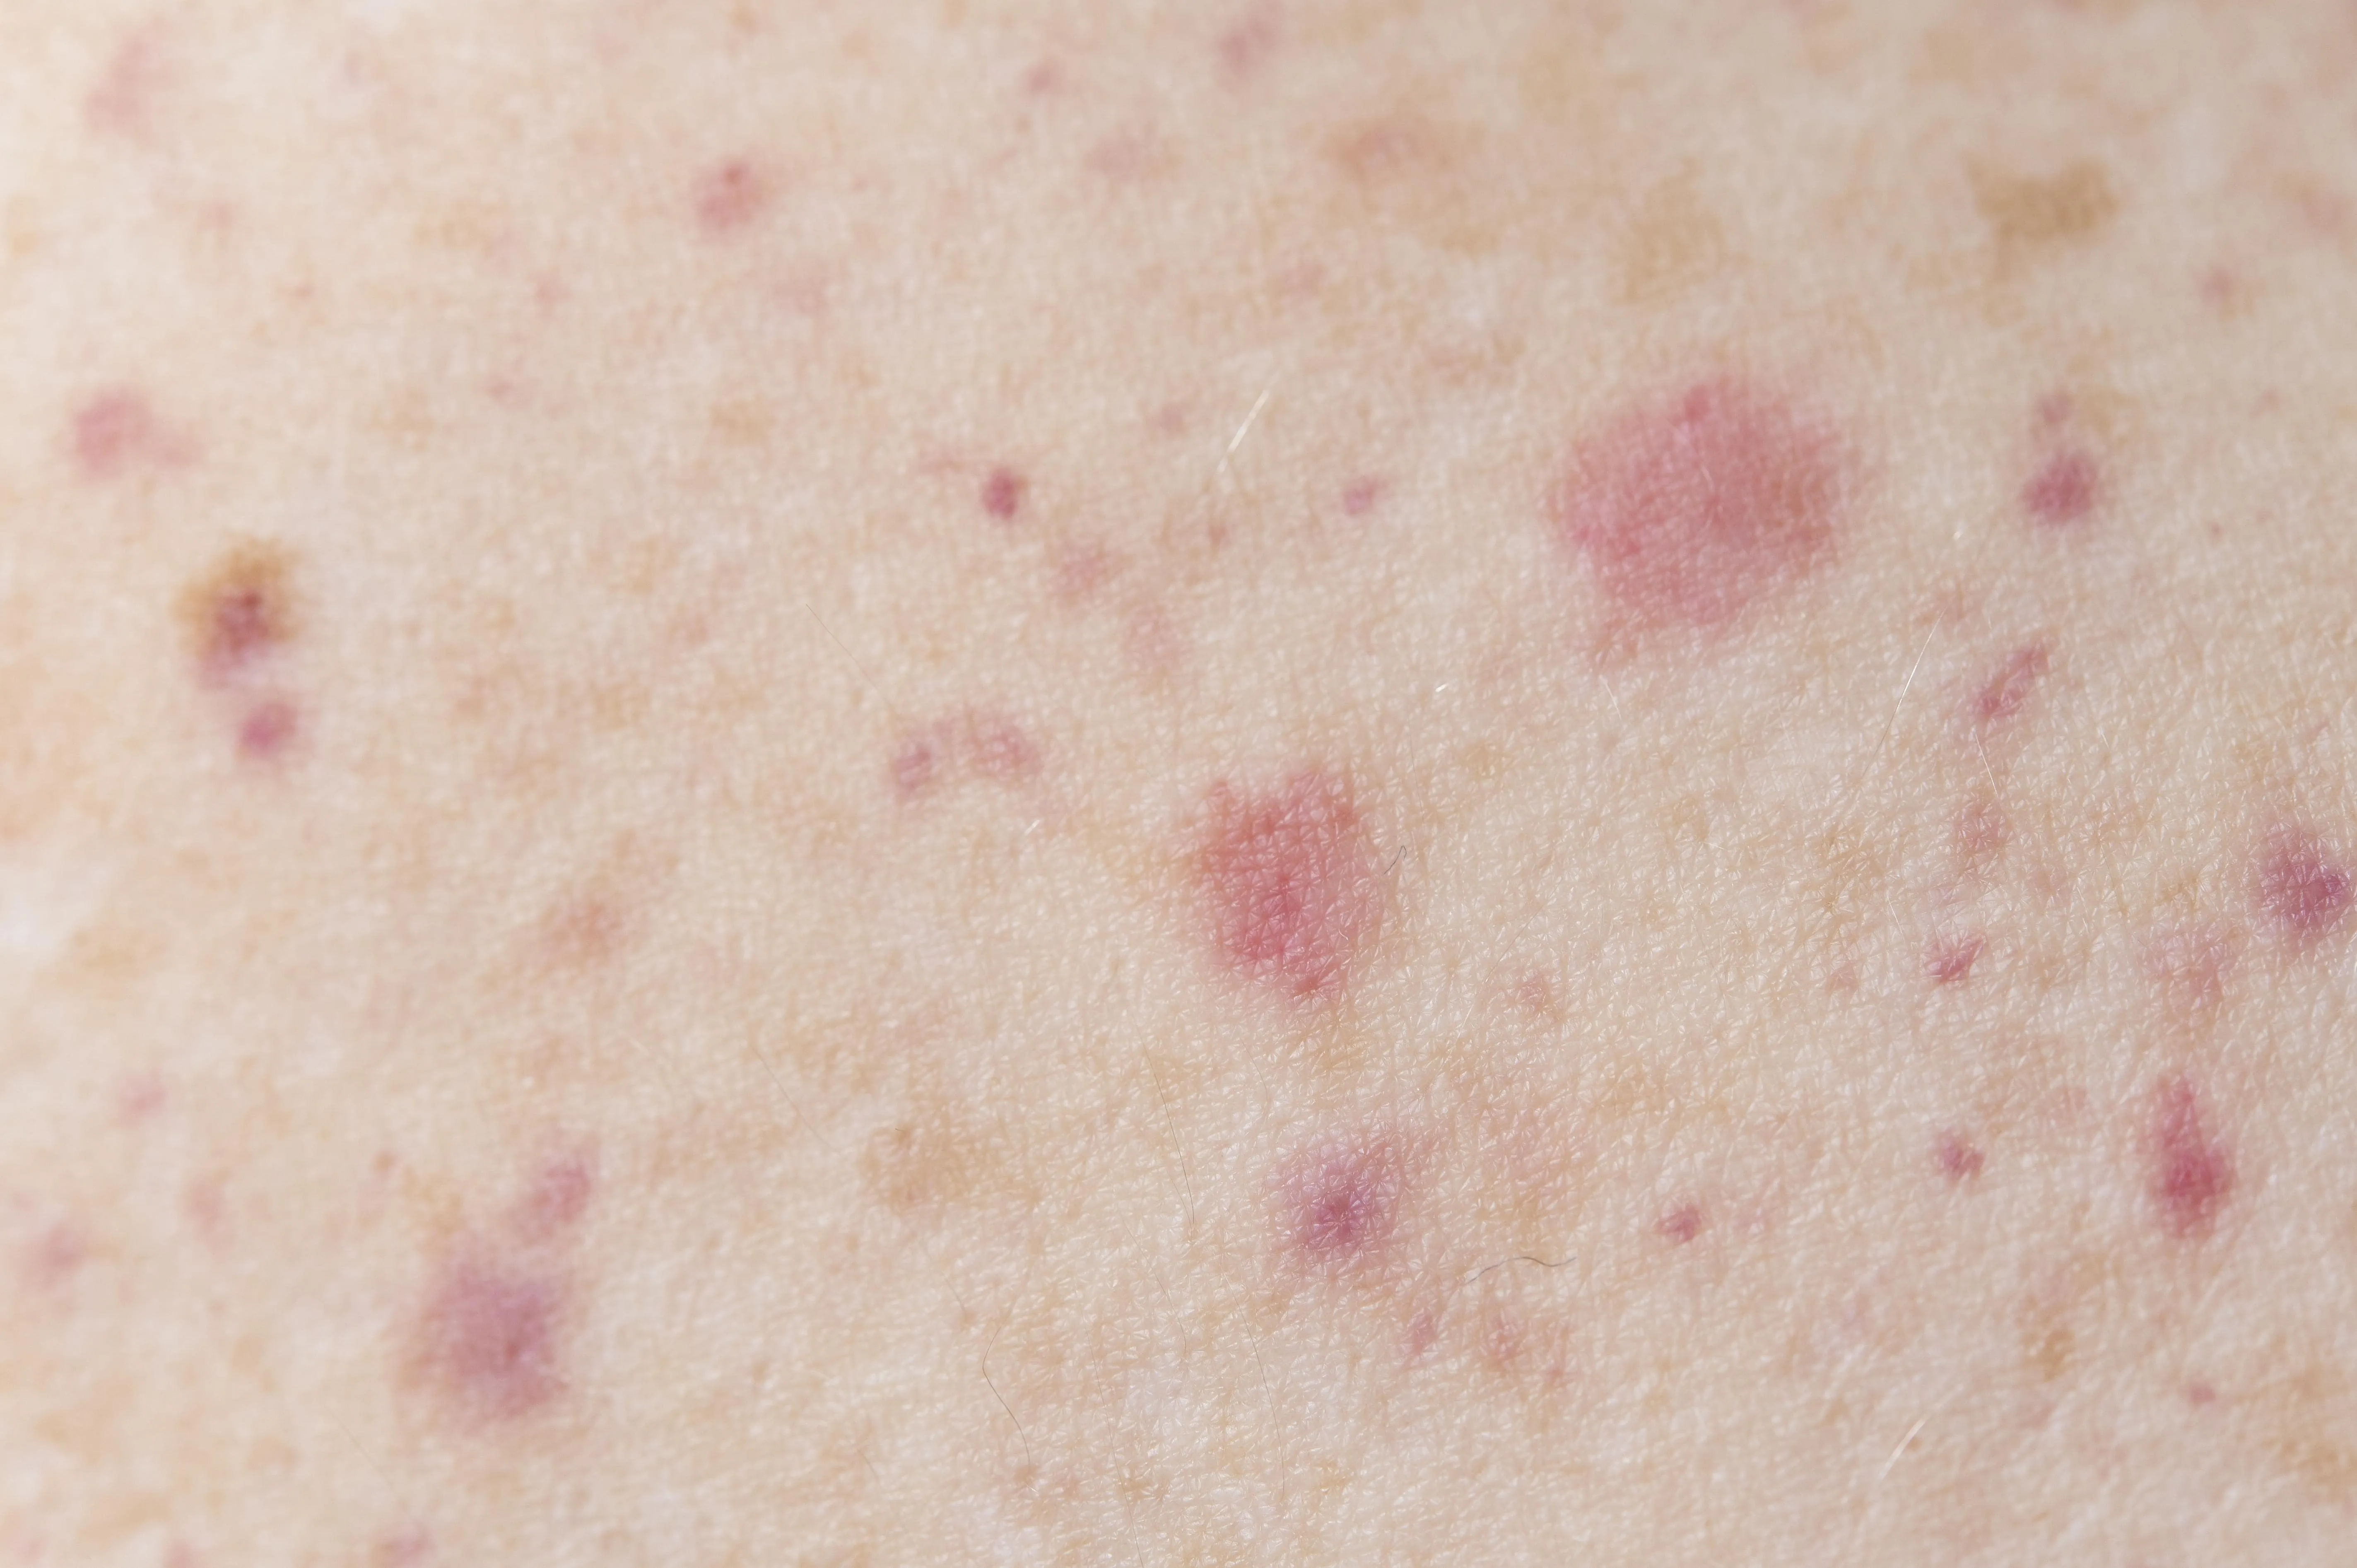 Skin Fungus: Causes, Symptoms, Treatments and Preventions.